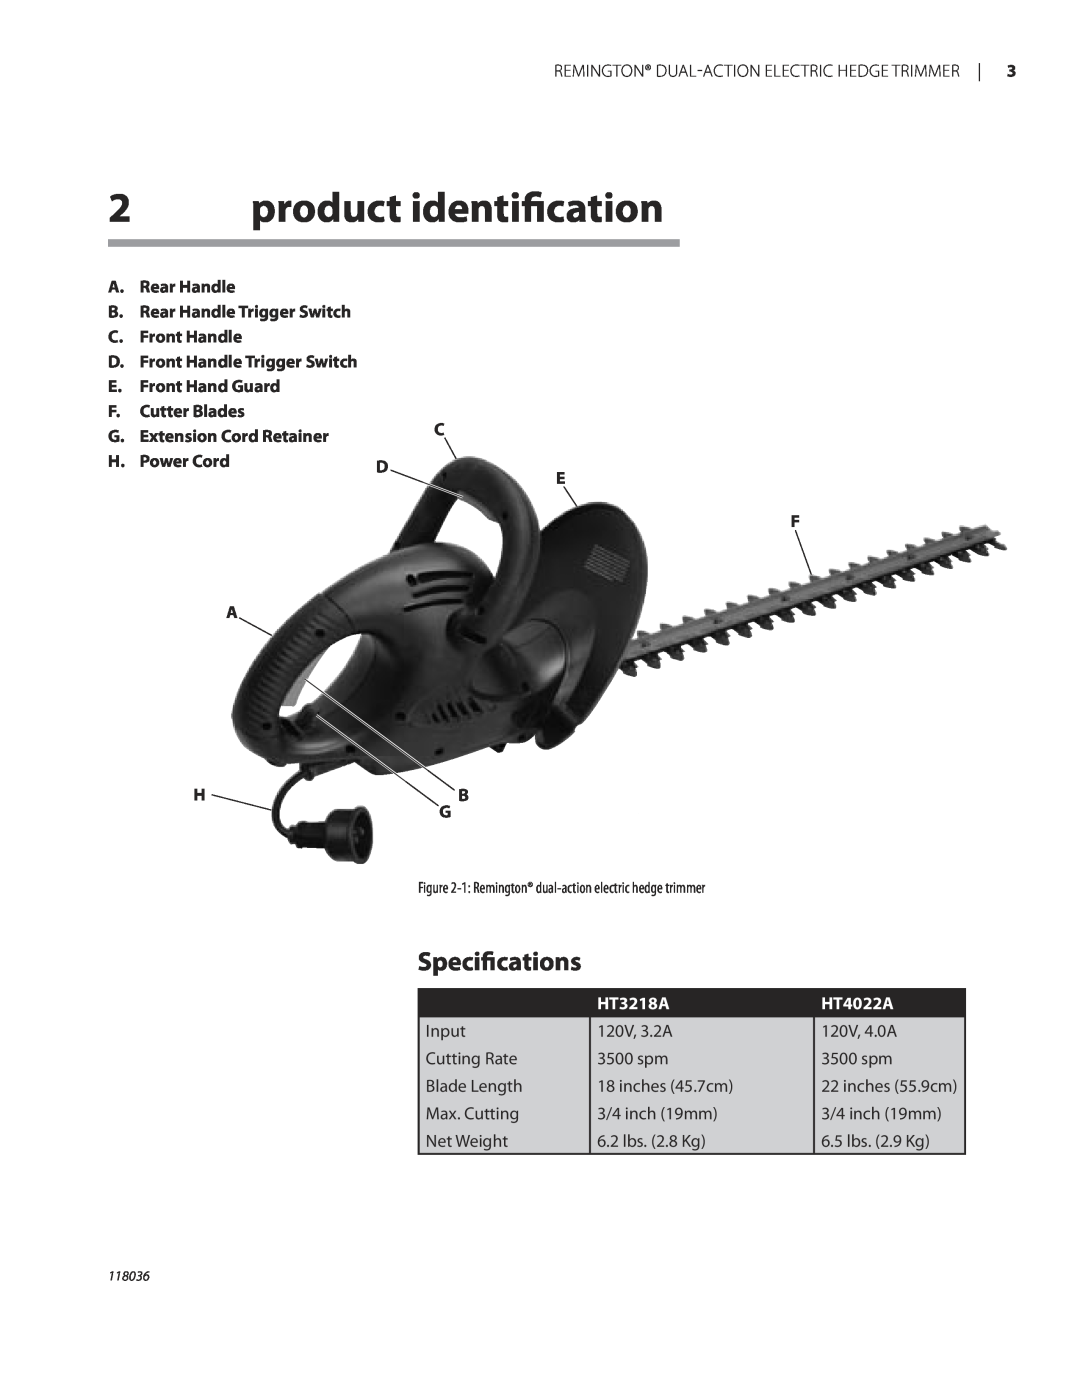 Remington HT3218A, HT4022A product identiﬁcation, Speciﬁcations, A.Rear Handle B.Rear Handle Trigger Switch, Power Cord 